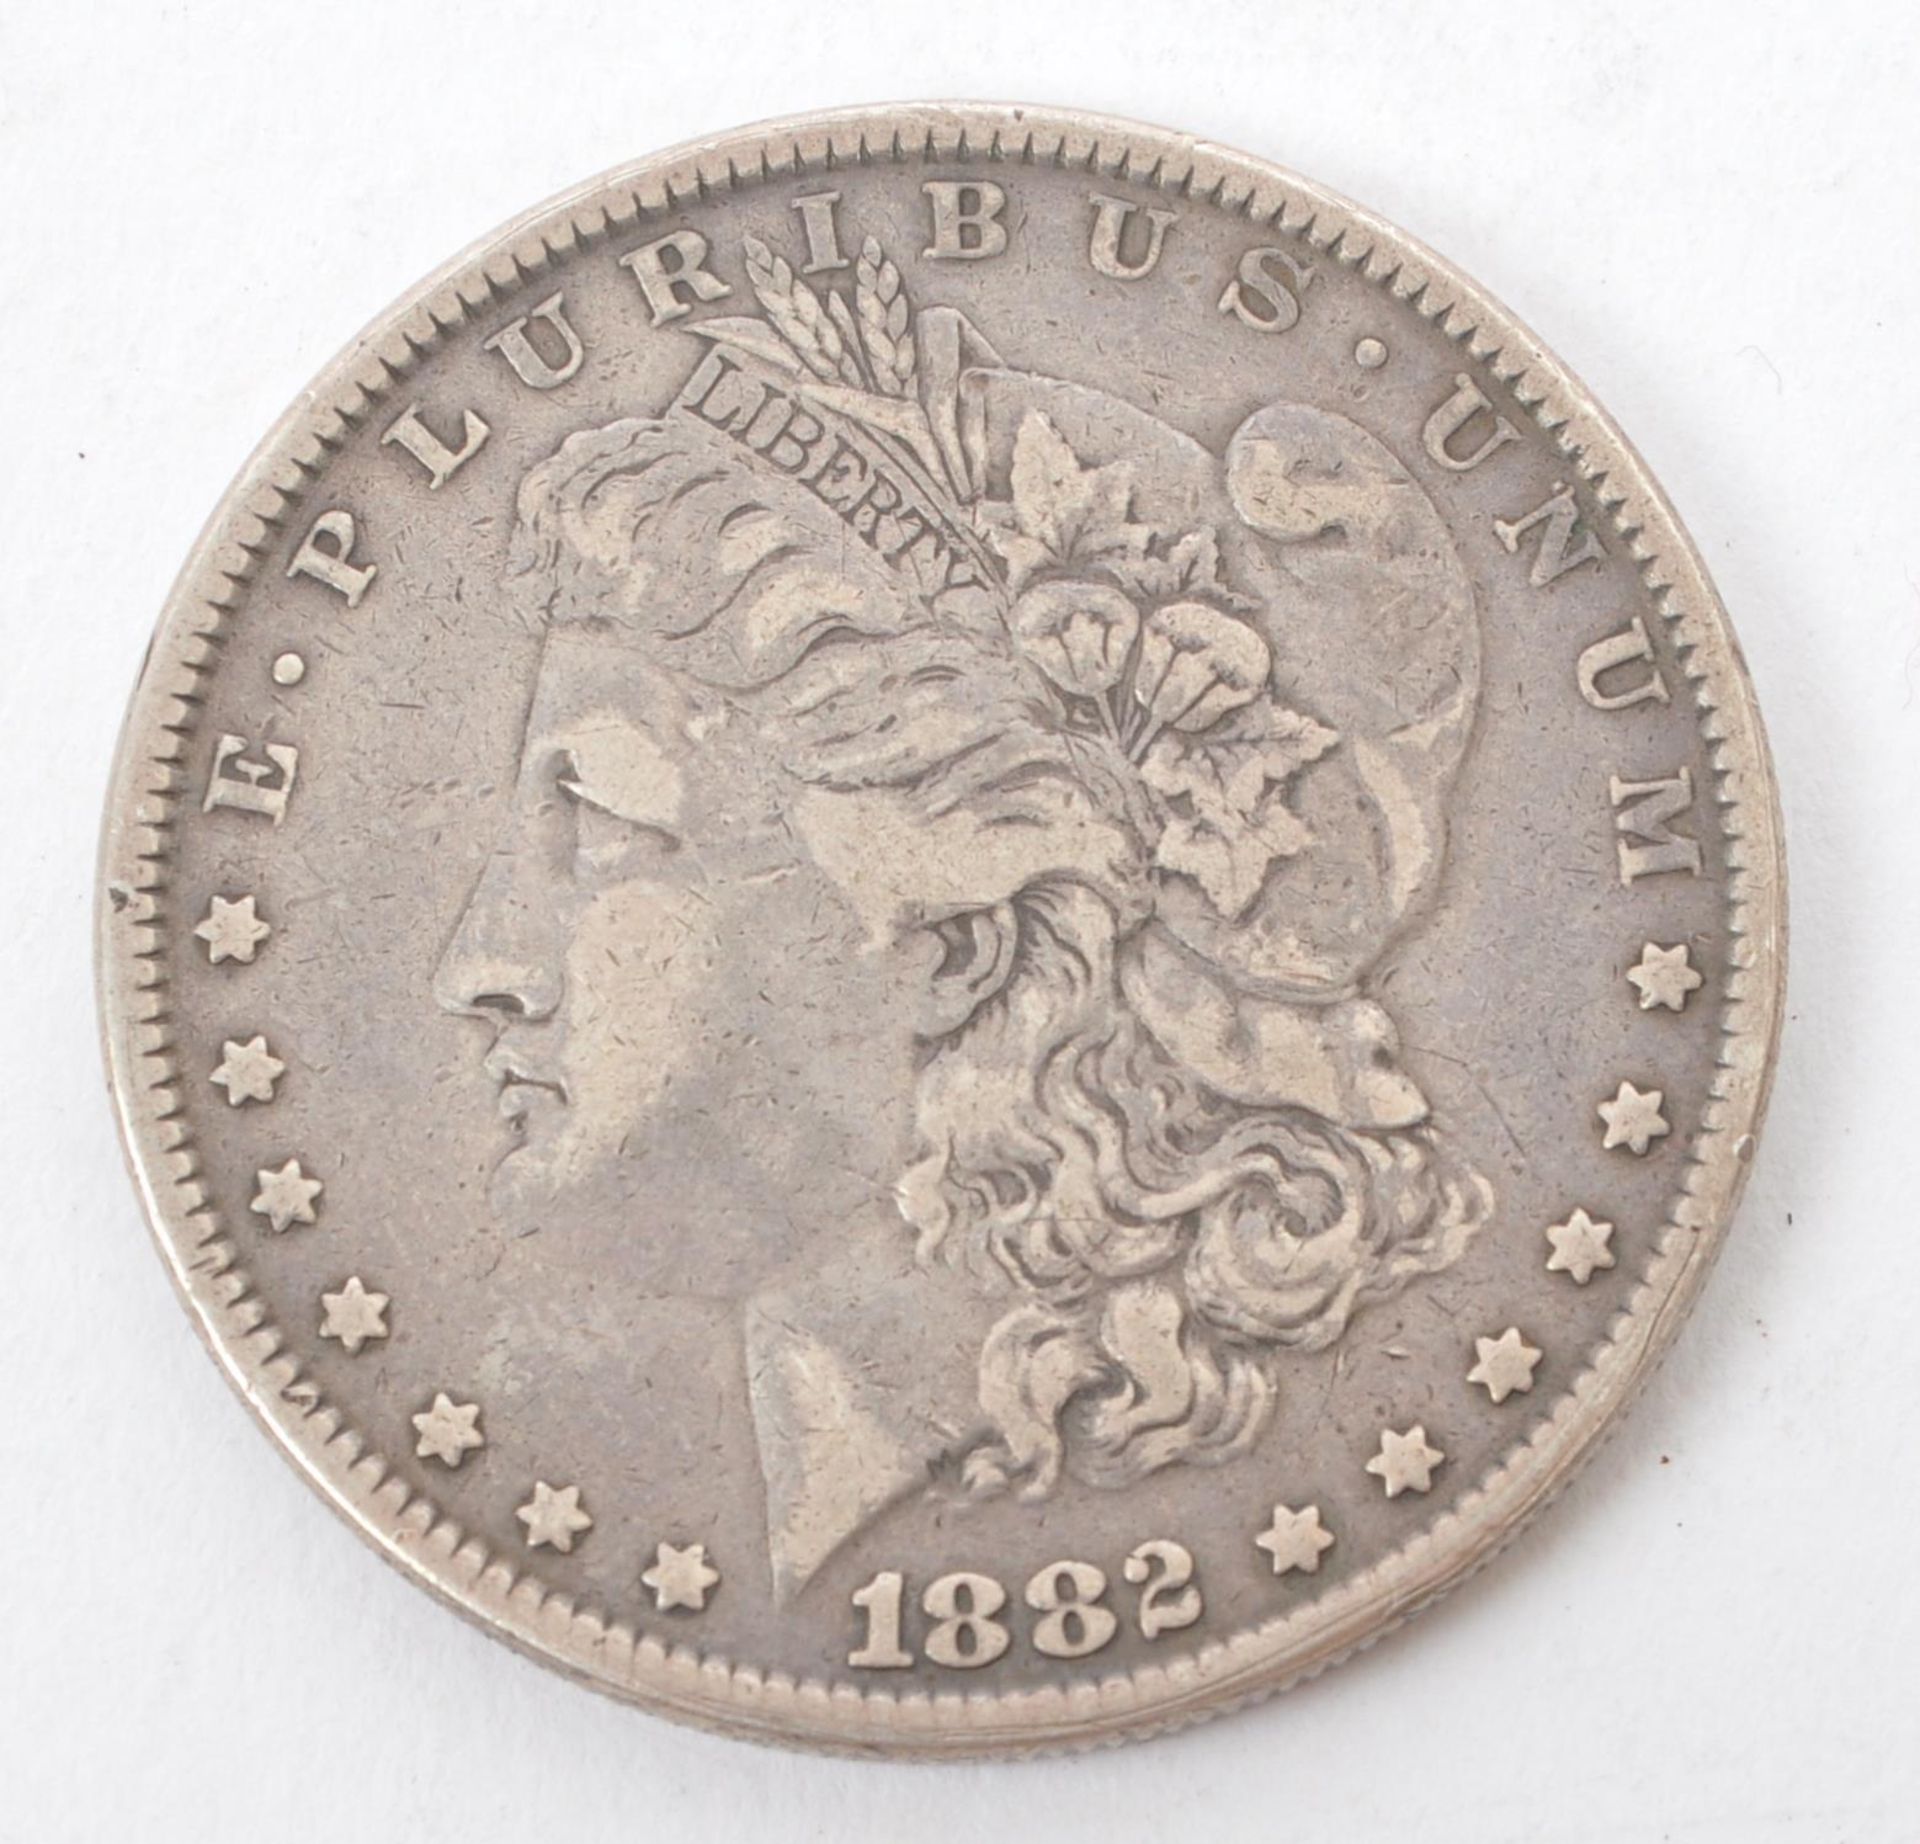 1882 UNITED STATES OF AMERICA SILVER MORGAN DOLLAR - Image 2 of 2